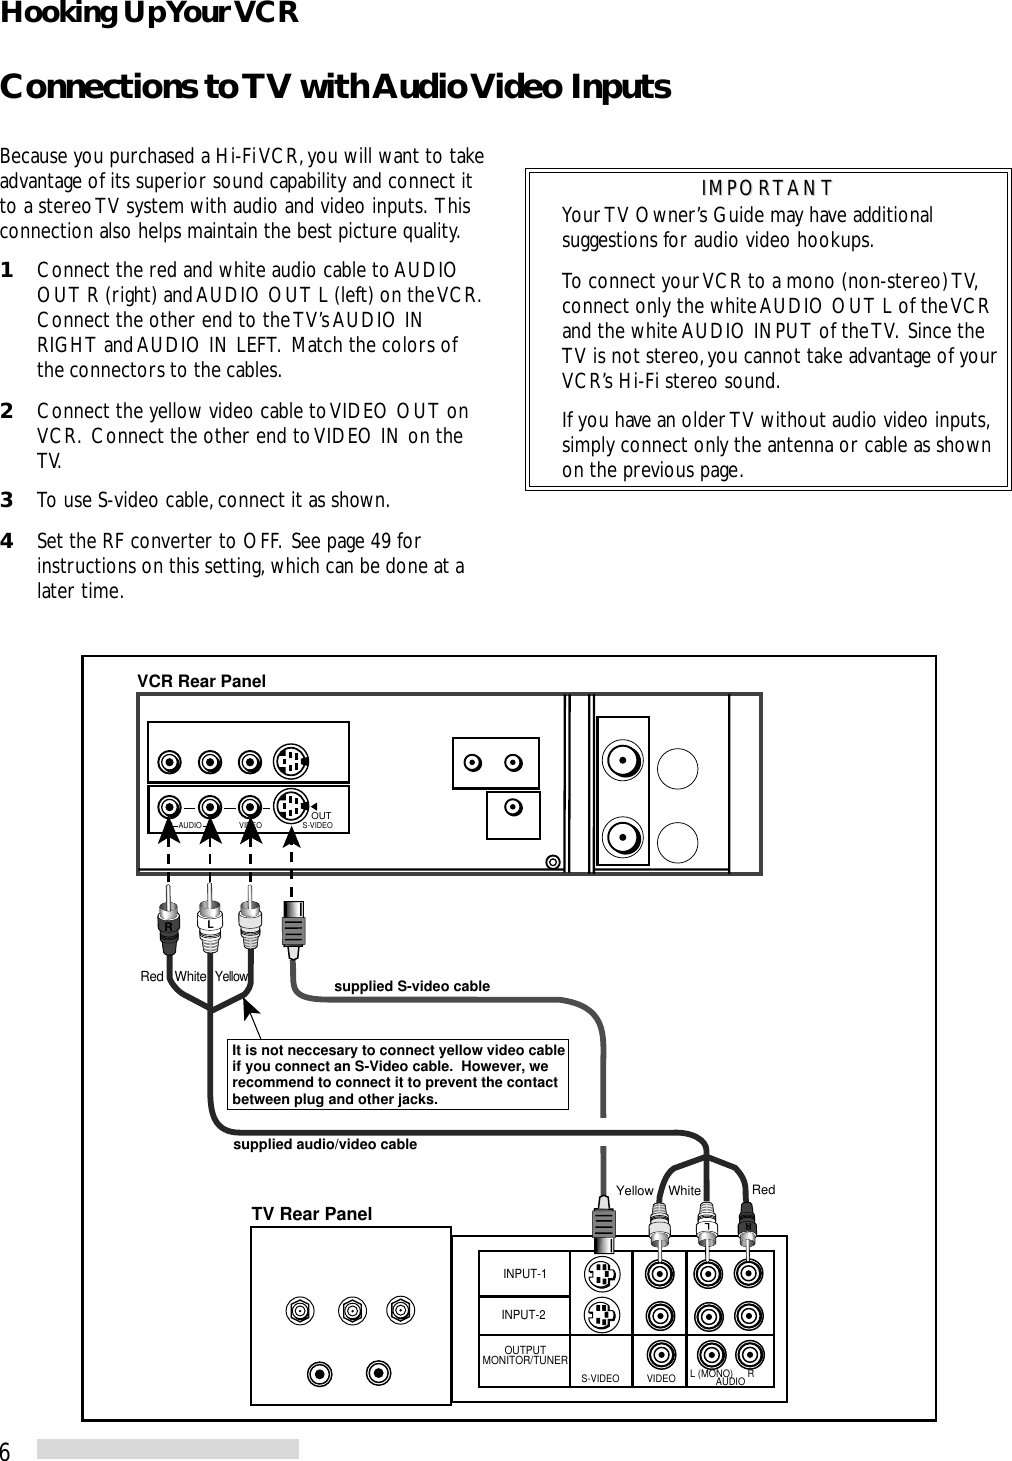 6IMPORTANTIMPORTANTYour TV Owner’s Guide may have additionalsuggestions for audio video hookups.To connect your VCR to a mono (non-stereo) TV,connect only the white AUDIO OUT L of the VCRand the white AUDIO INPUT of the TV.  Since theTV is not stereo, you cannot take advantage of yourVCR’s Hi-Fi stereo sound.If you have an older TV without audio video inputs,simply connect only the antenna or cable as shownon the previous page.Connections to TV with Audio Video InputsINPUT-1INPUT-2OUTPUTMONITOR/TUNERS-VIDEO VIDEO L (MONO) RAUDIOVIDEO S-VIDEOOUTAUDIORLLRLRRWhite RedYellowsupplied audio/video cablesupplied S-video cableWhiteRedYellowTV Rear PanelVCR Rear PanelIt is not neccesary to connect yellow video cable if you connect an S-Video cable.  However, we recommend to connect it to prevent the contact between plug and other jacks. Because you purchased a Hi-Fi VCR, you will want to takeadvantage of its superior sound capability and connect itto a stereo TV system with audio and video inputs.  Thisconnection also helps maintain the best picture quality.1Connect the red and white audio cable to AUDIOOUT R (right) and AUDIO OUT L (left) on the VCR.Connect the other end to the TV’s AUDIO INRIGHT and AUDIO IN LEFT.  Match the colors ofthe connectors to the cables.2Connect the yellow video cable to VIDEO OUT onVCR.  Connect the other end to VIDEO IN on theTV.3To use S-video cable, connect it as shown.4Set the RF converter to OFF.  See page 49 forinstructions on this setting, which can be done at alater time.Hooking Up Your VCR